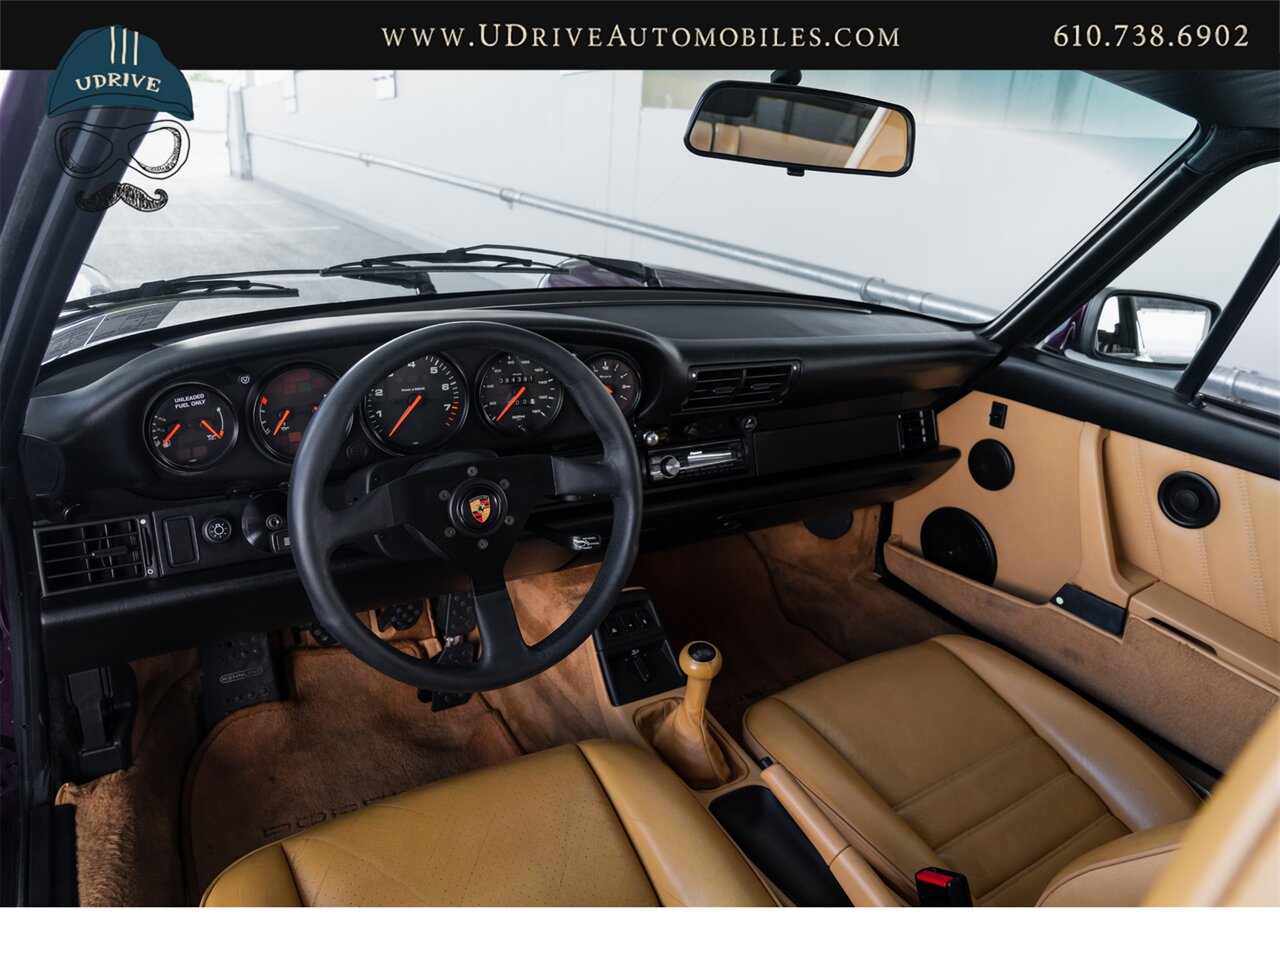 1991 Porsche 911 Carrera 2  5 Speed $57k in Service and UpGrades Since 2020 - Photo 38 - West Chester, PA 19382